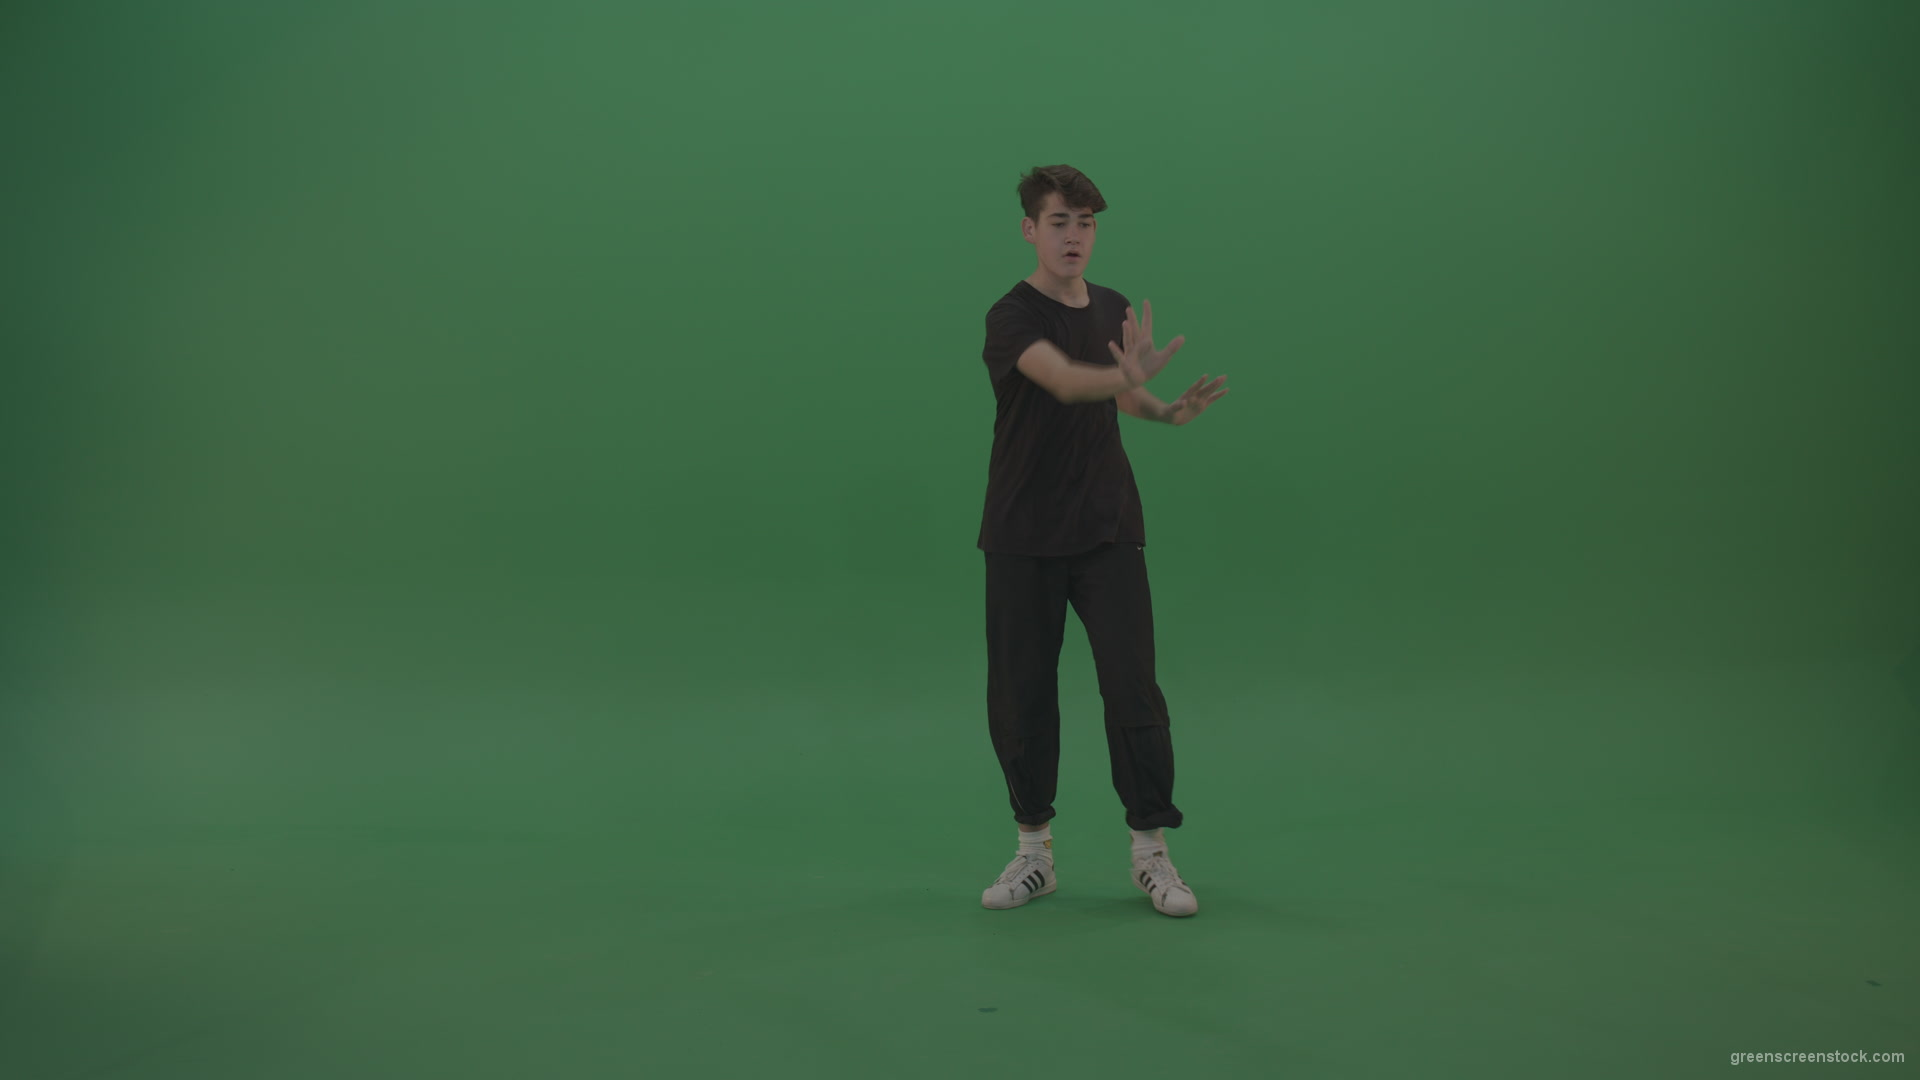 Young_Brunette_Boy_Showing_Awesome_Hip_Hop_Dance_Technical_Skills_With_Robot_Tought_Moves_On_Green_Screen_Chroma_Key_Background_004 Green Screen Stock